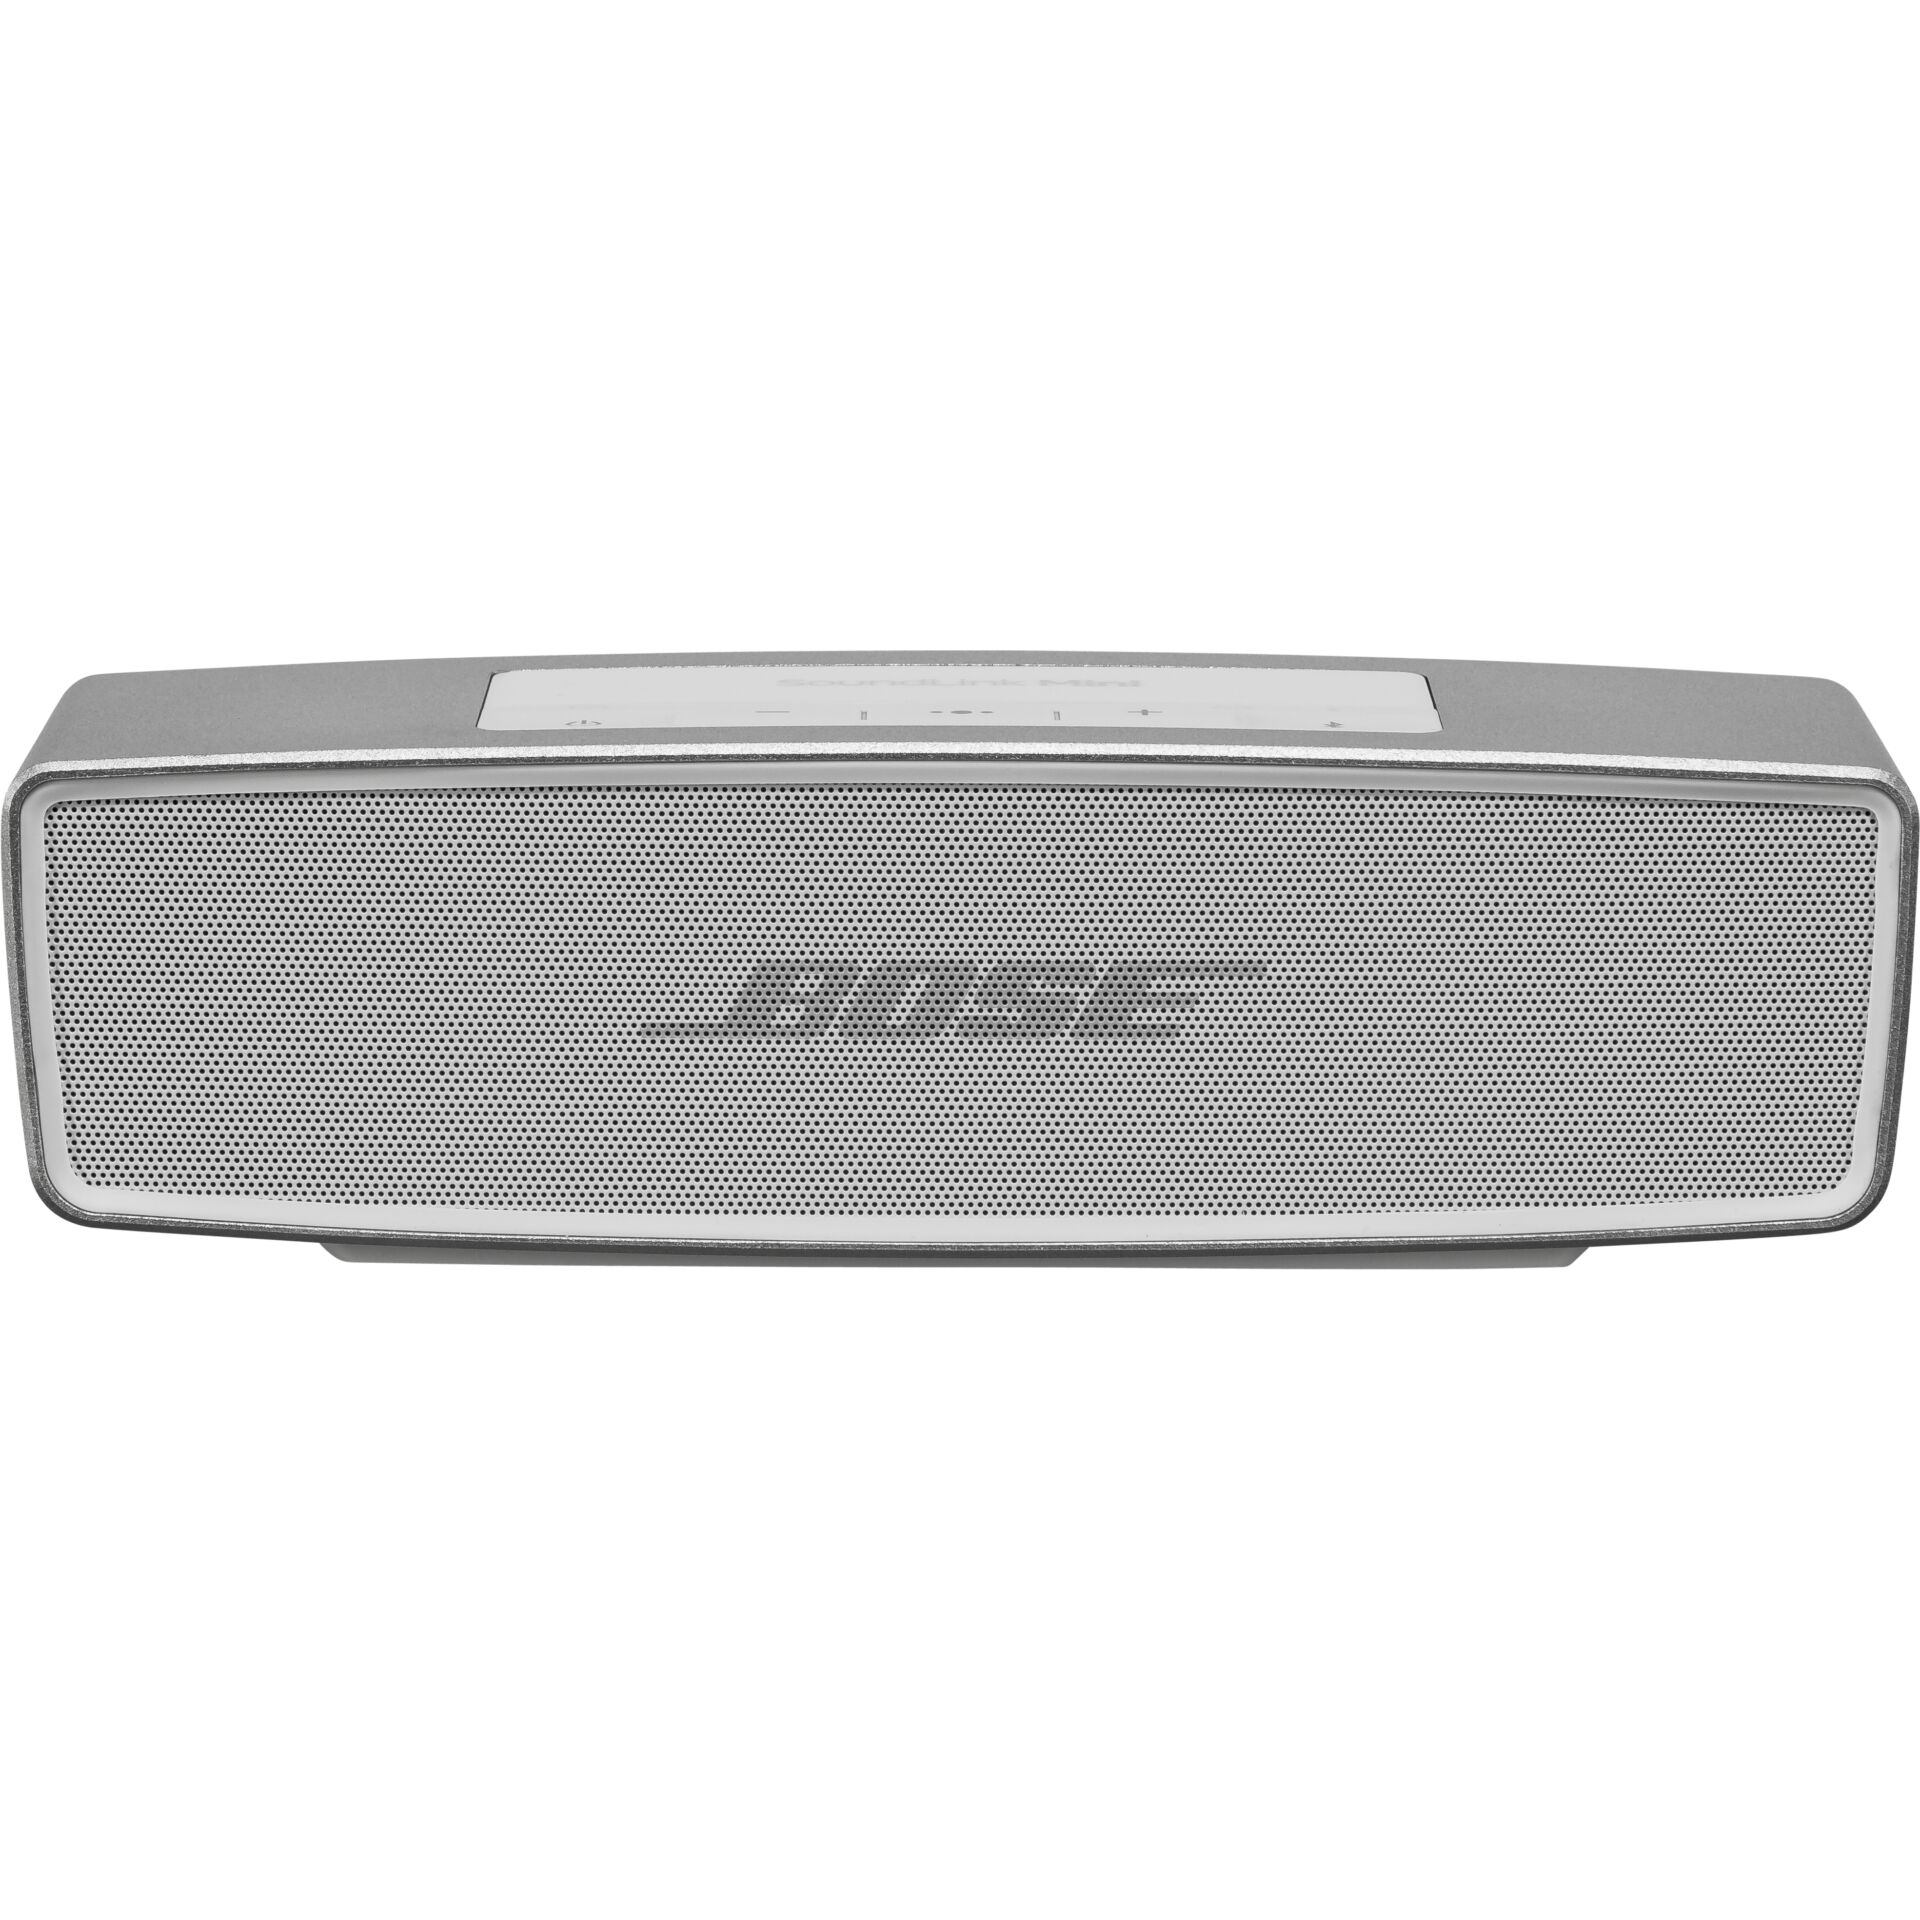 Bose SoundLink Mini II Special Edition silber